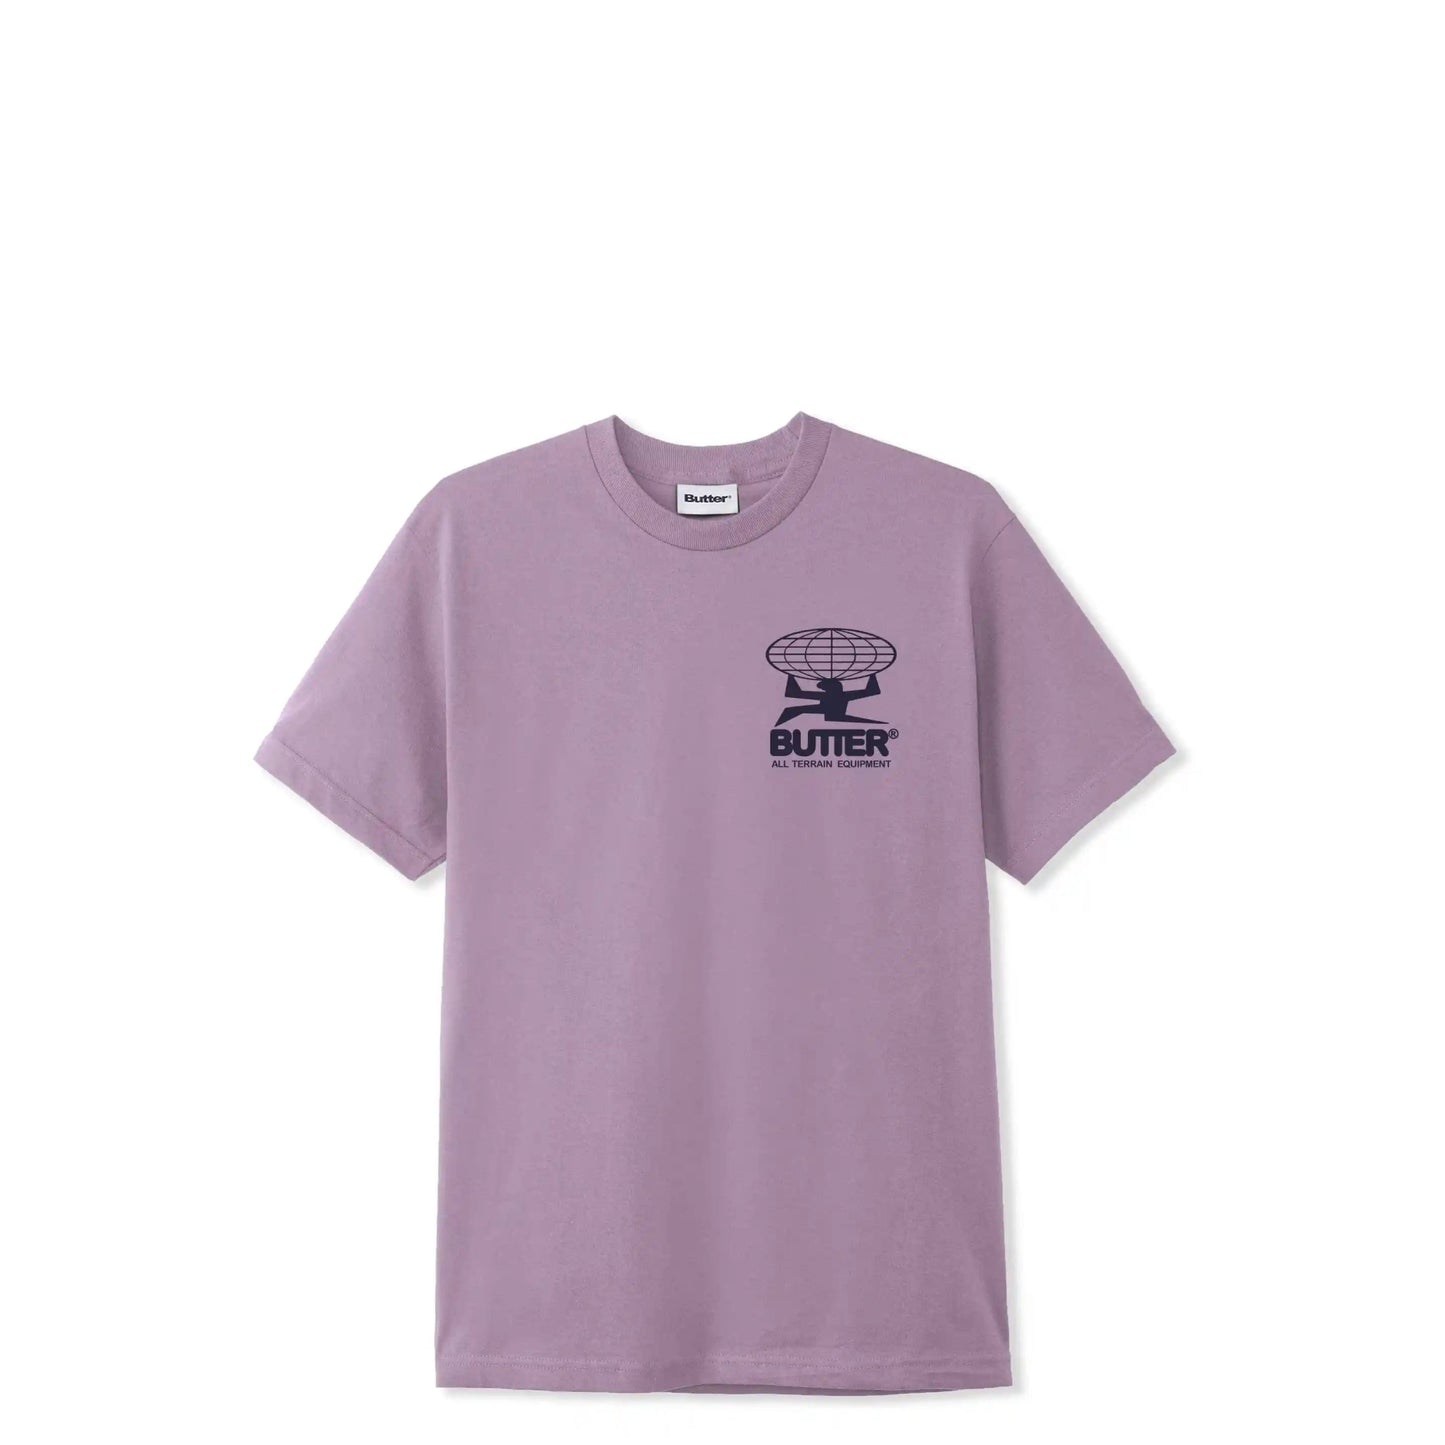 Butter Goods All Terrain Tee, washed berry - Tiki Room Skateboards - 1